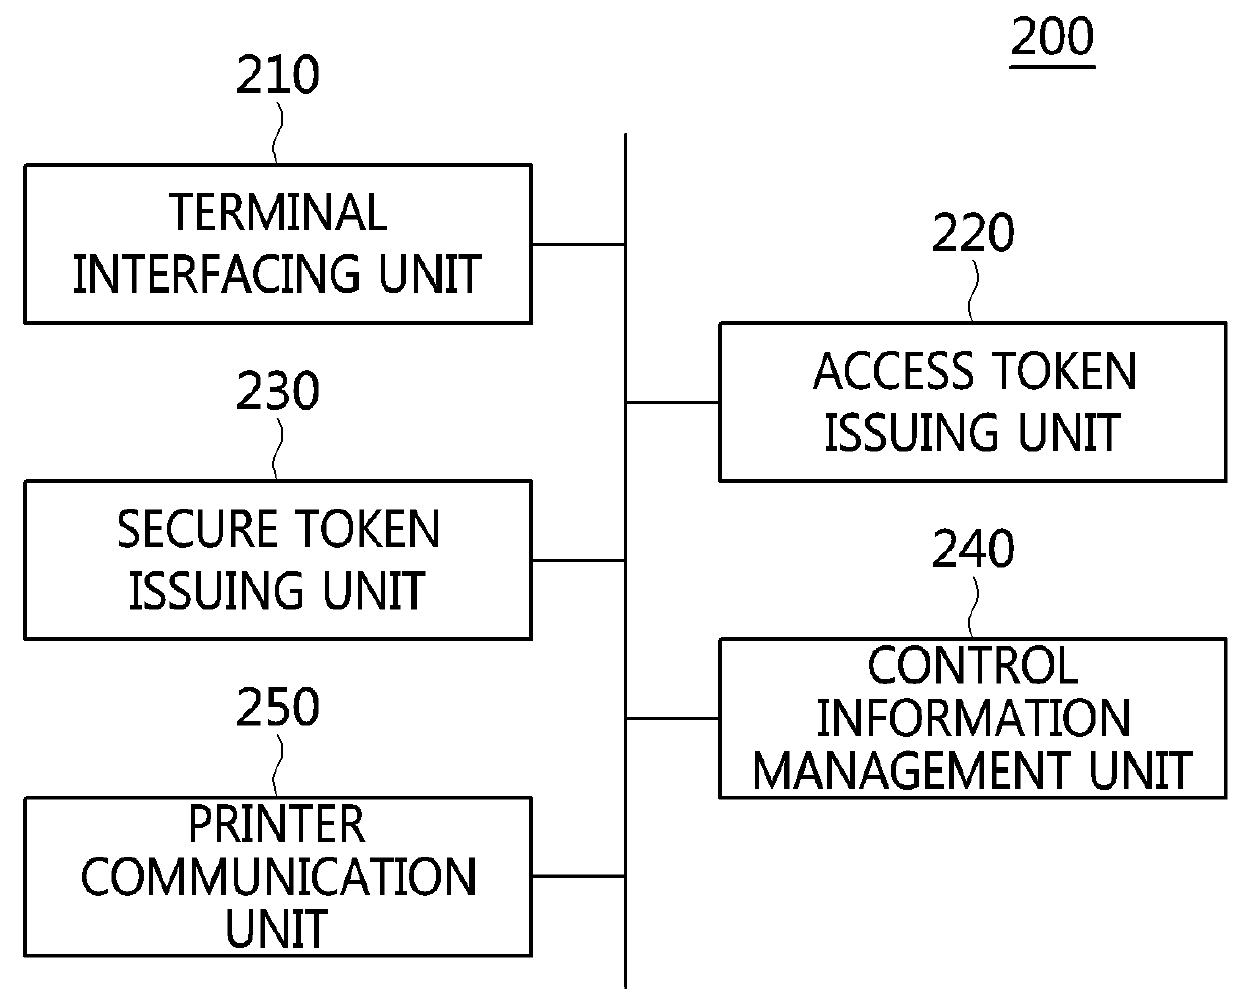 Service server, user terminal and method of 3D collaborative printing